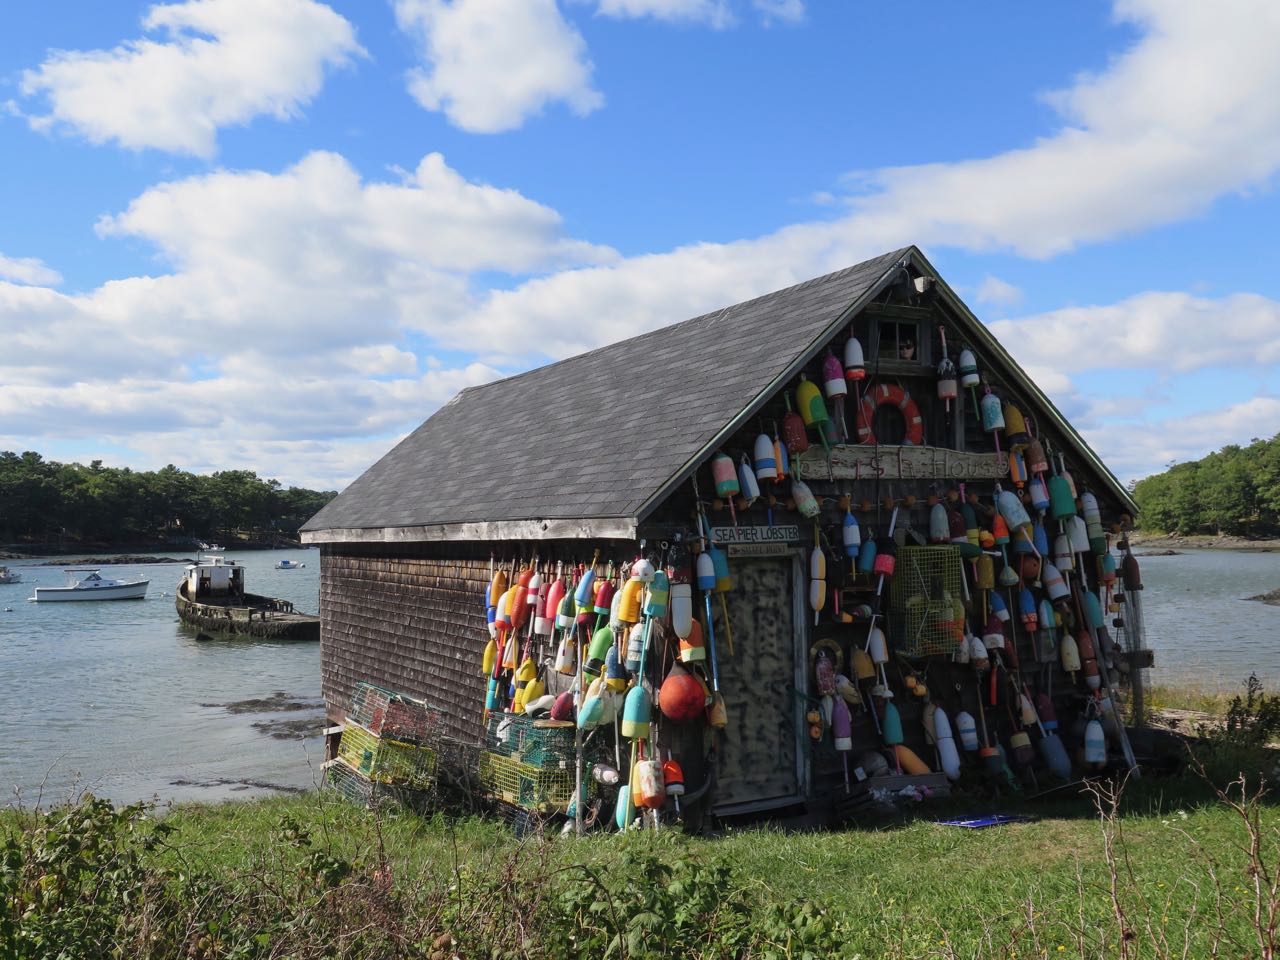 Top 10: What to see and do in Boothbay, Maine – Maine Travel Maven